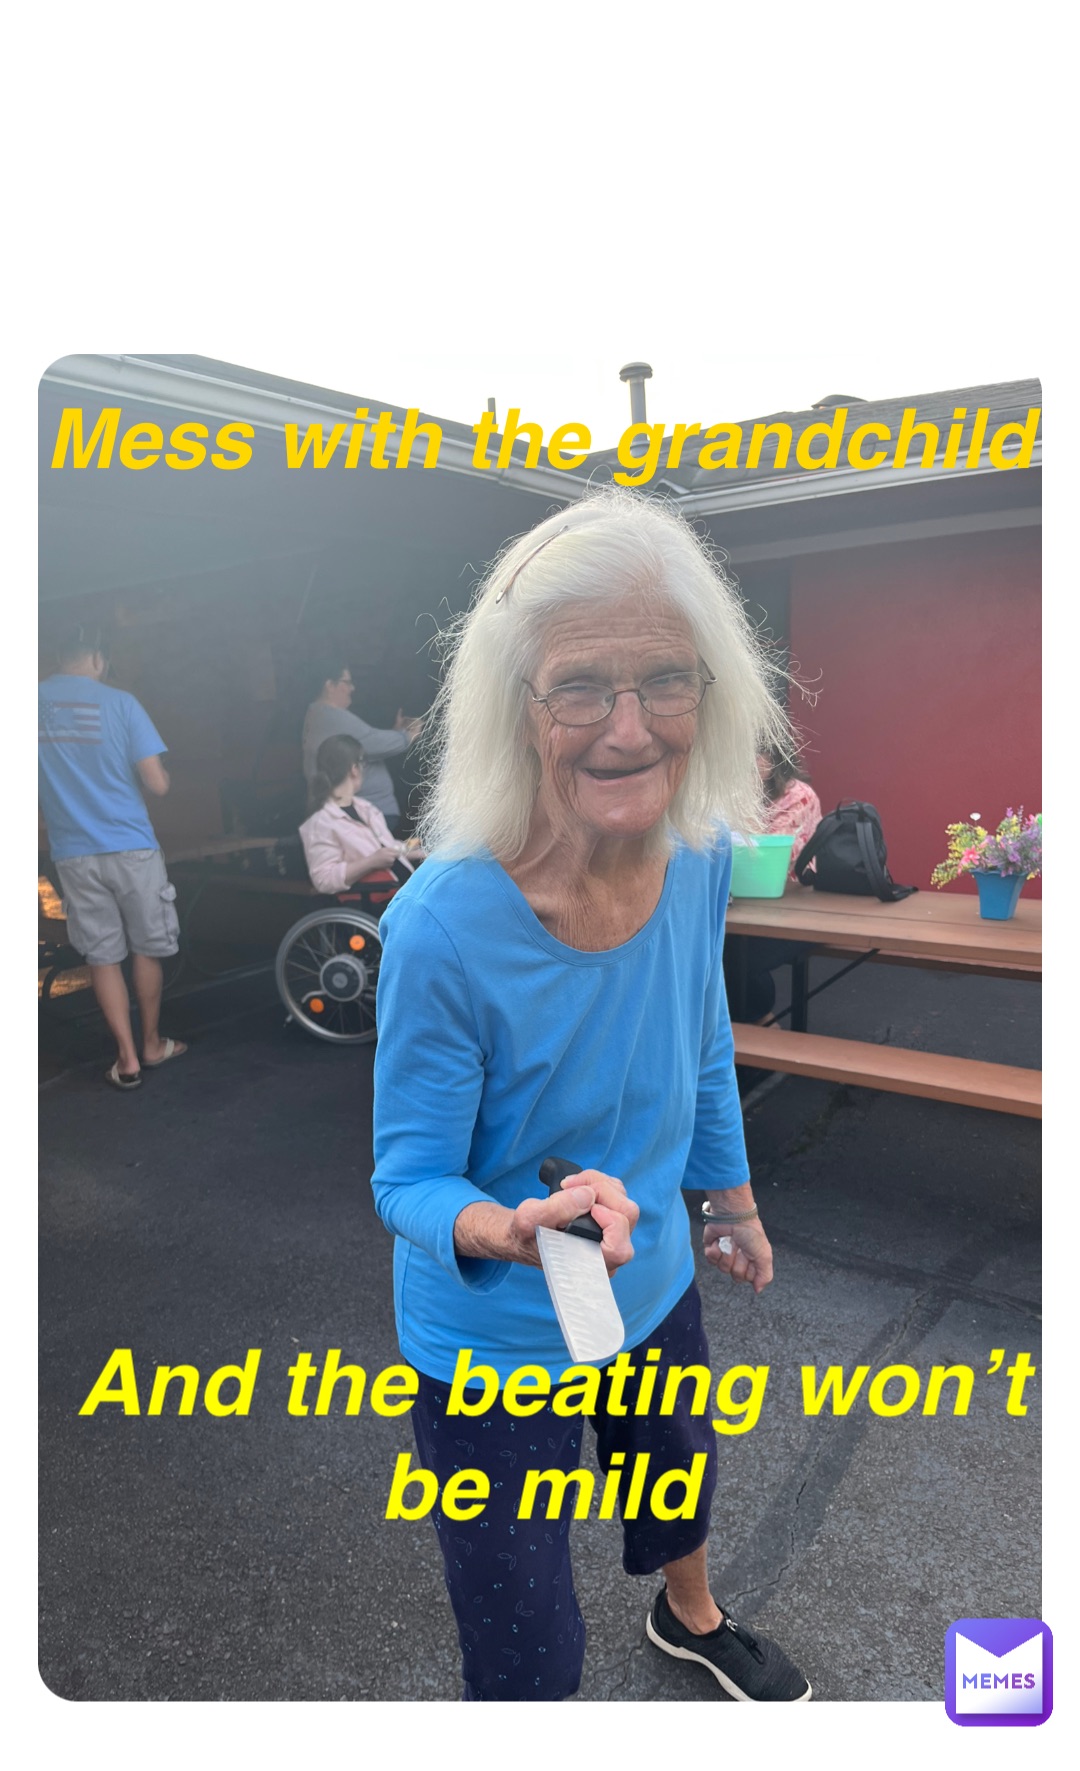 Double tap to edit Mess with the grandchild And the beating won’t be mild